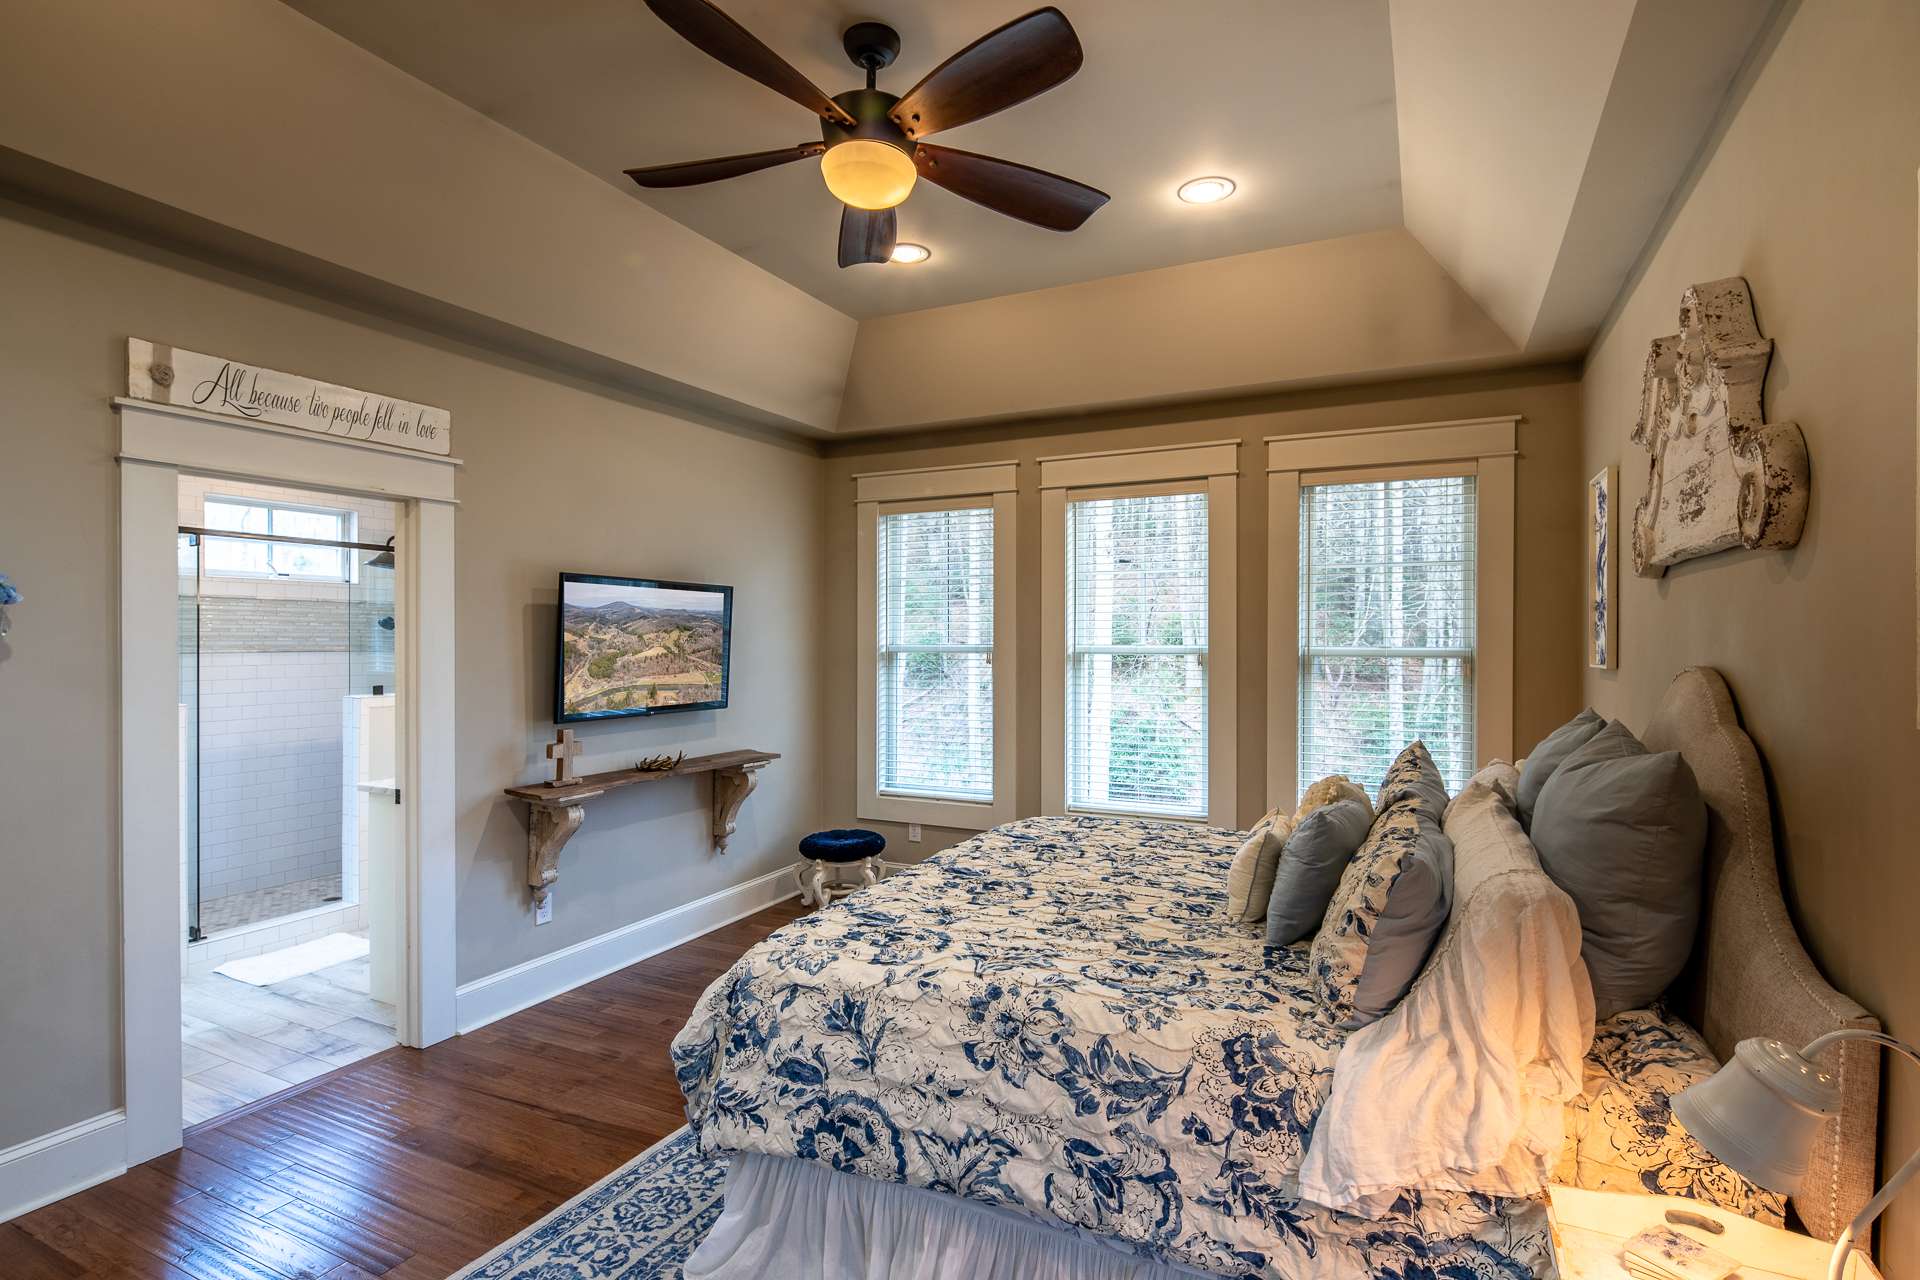 The master suite is situated for privacy and features a tray ceiling and private bath with  huge walk-in closet with built-in storage and dressing table.